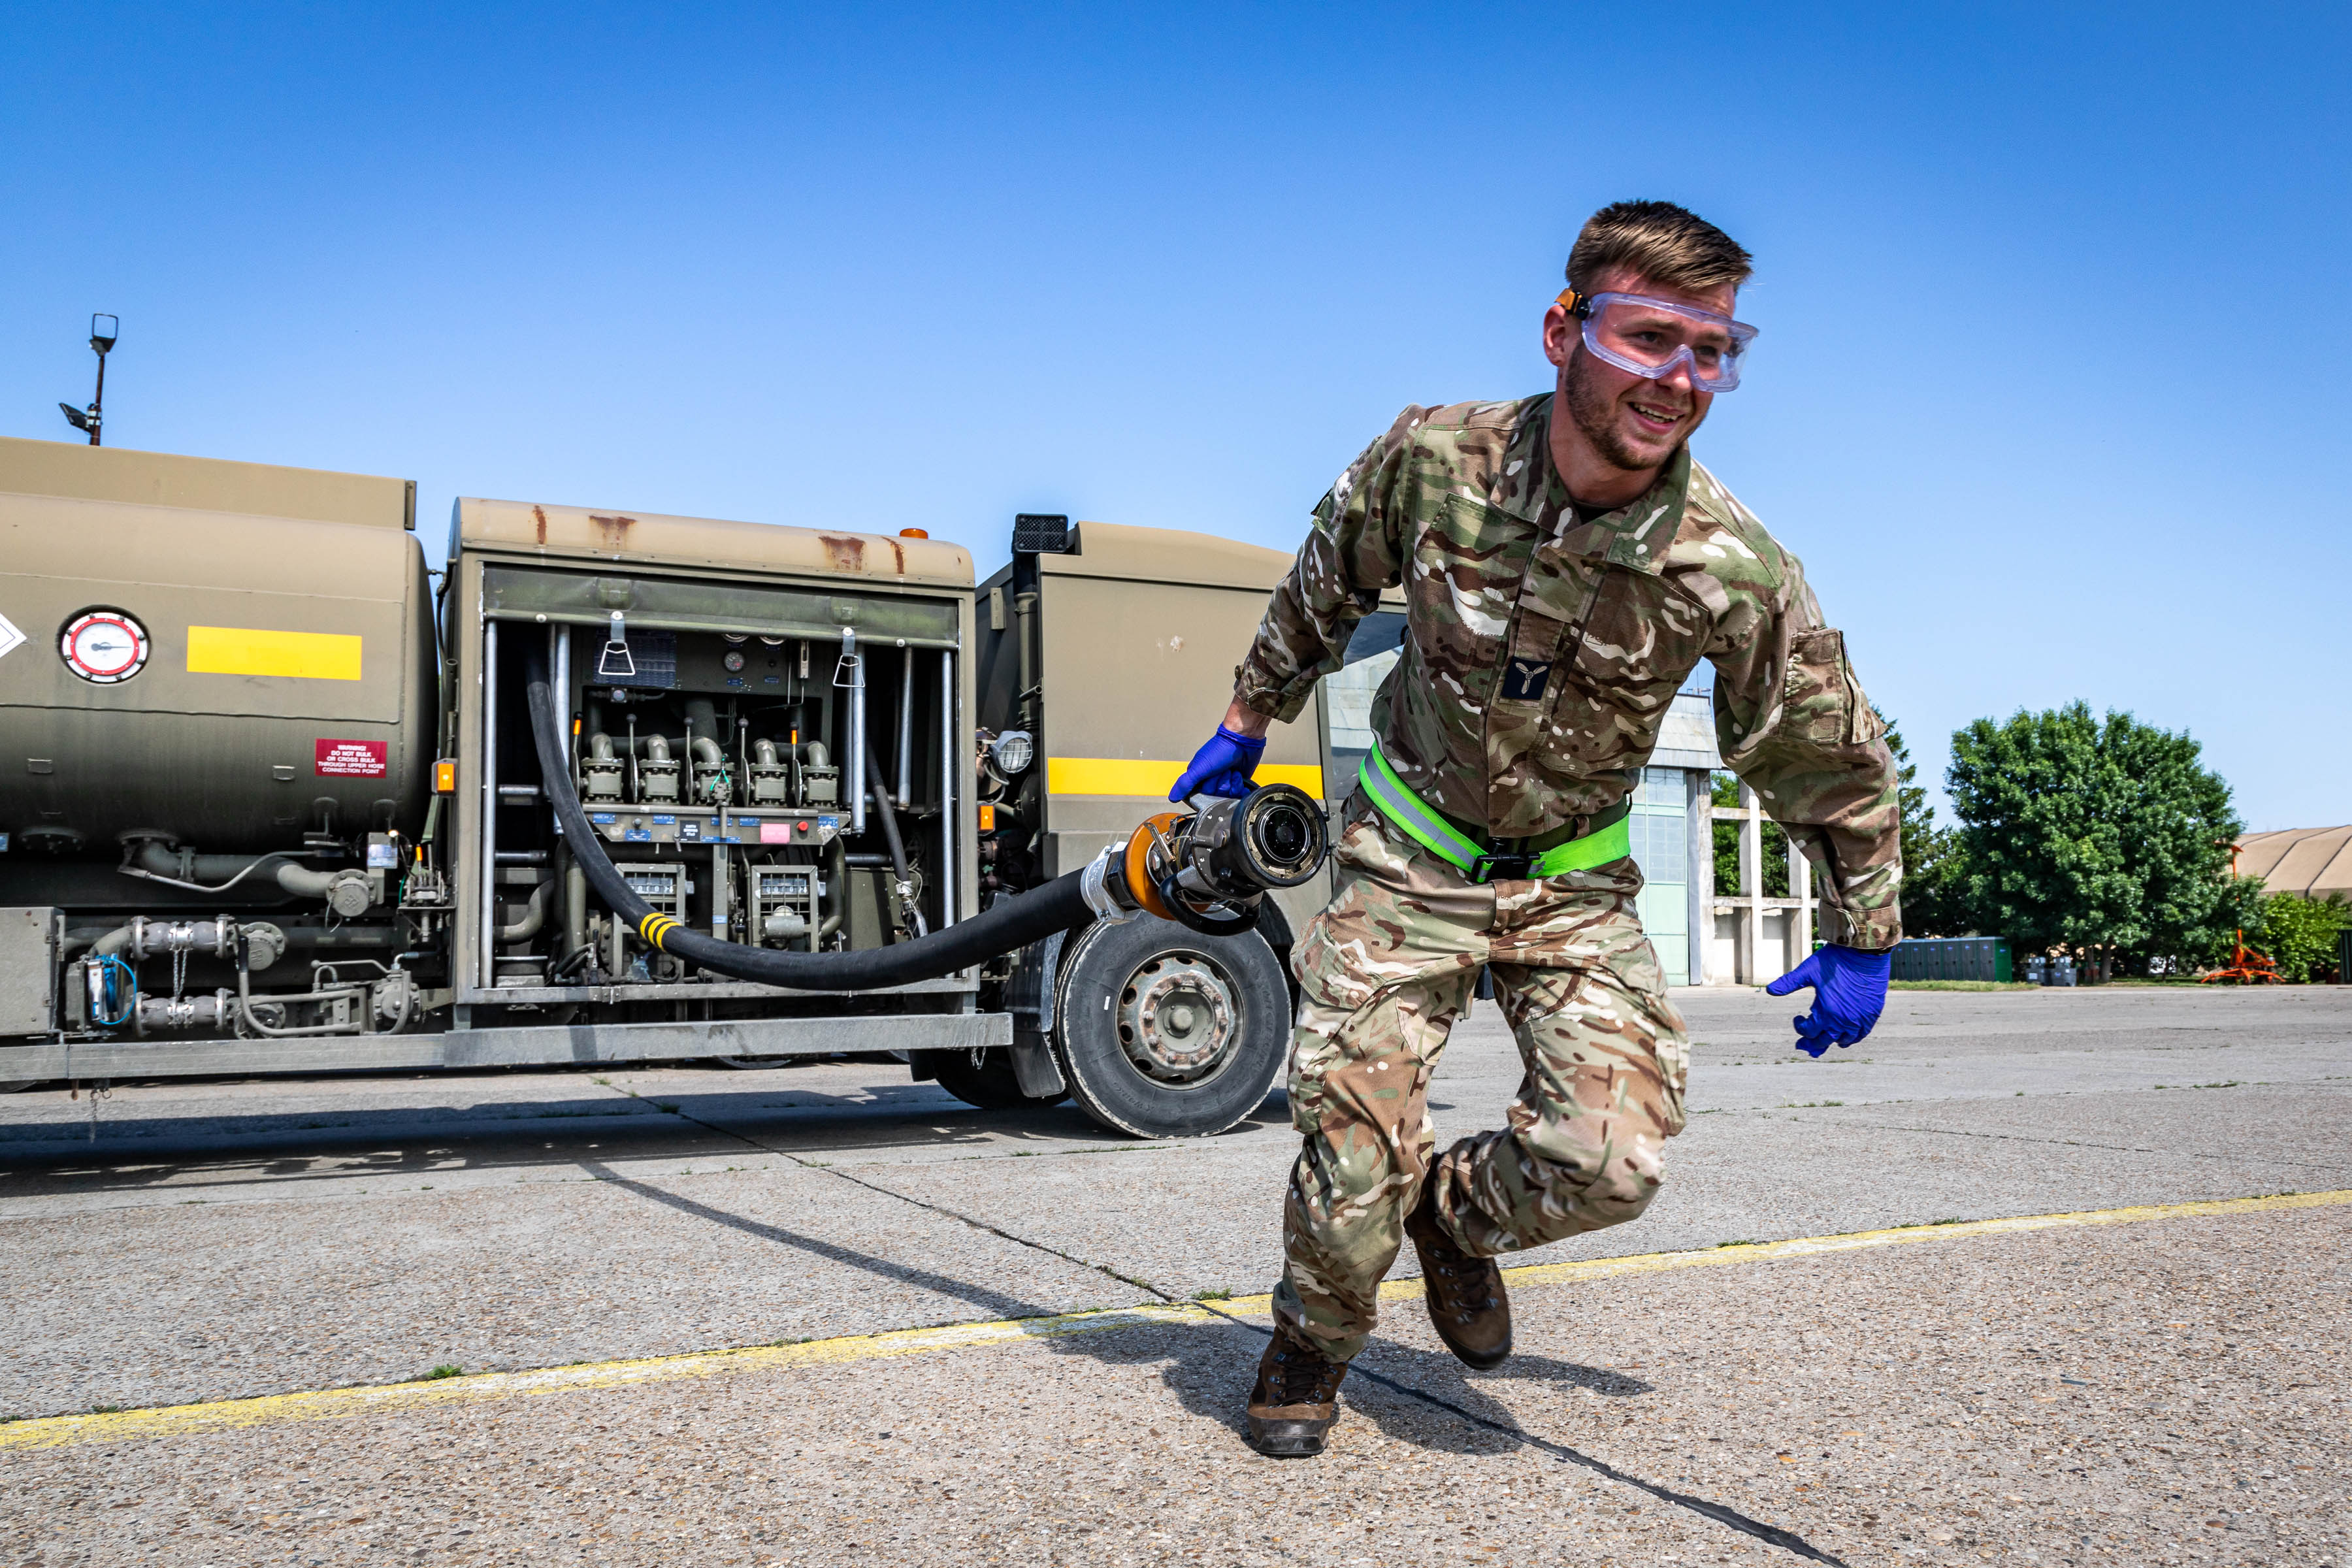 SAC Wardale of 2MT Squadron refuelling a jet